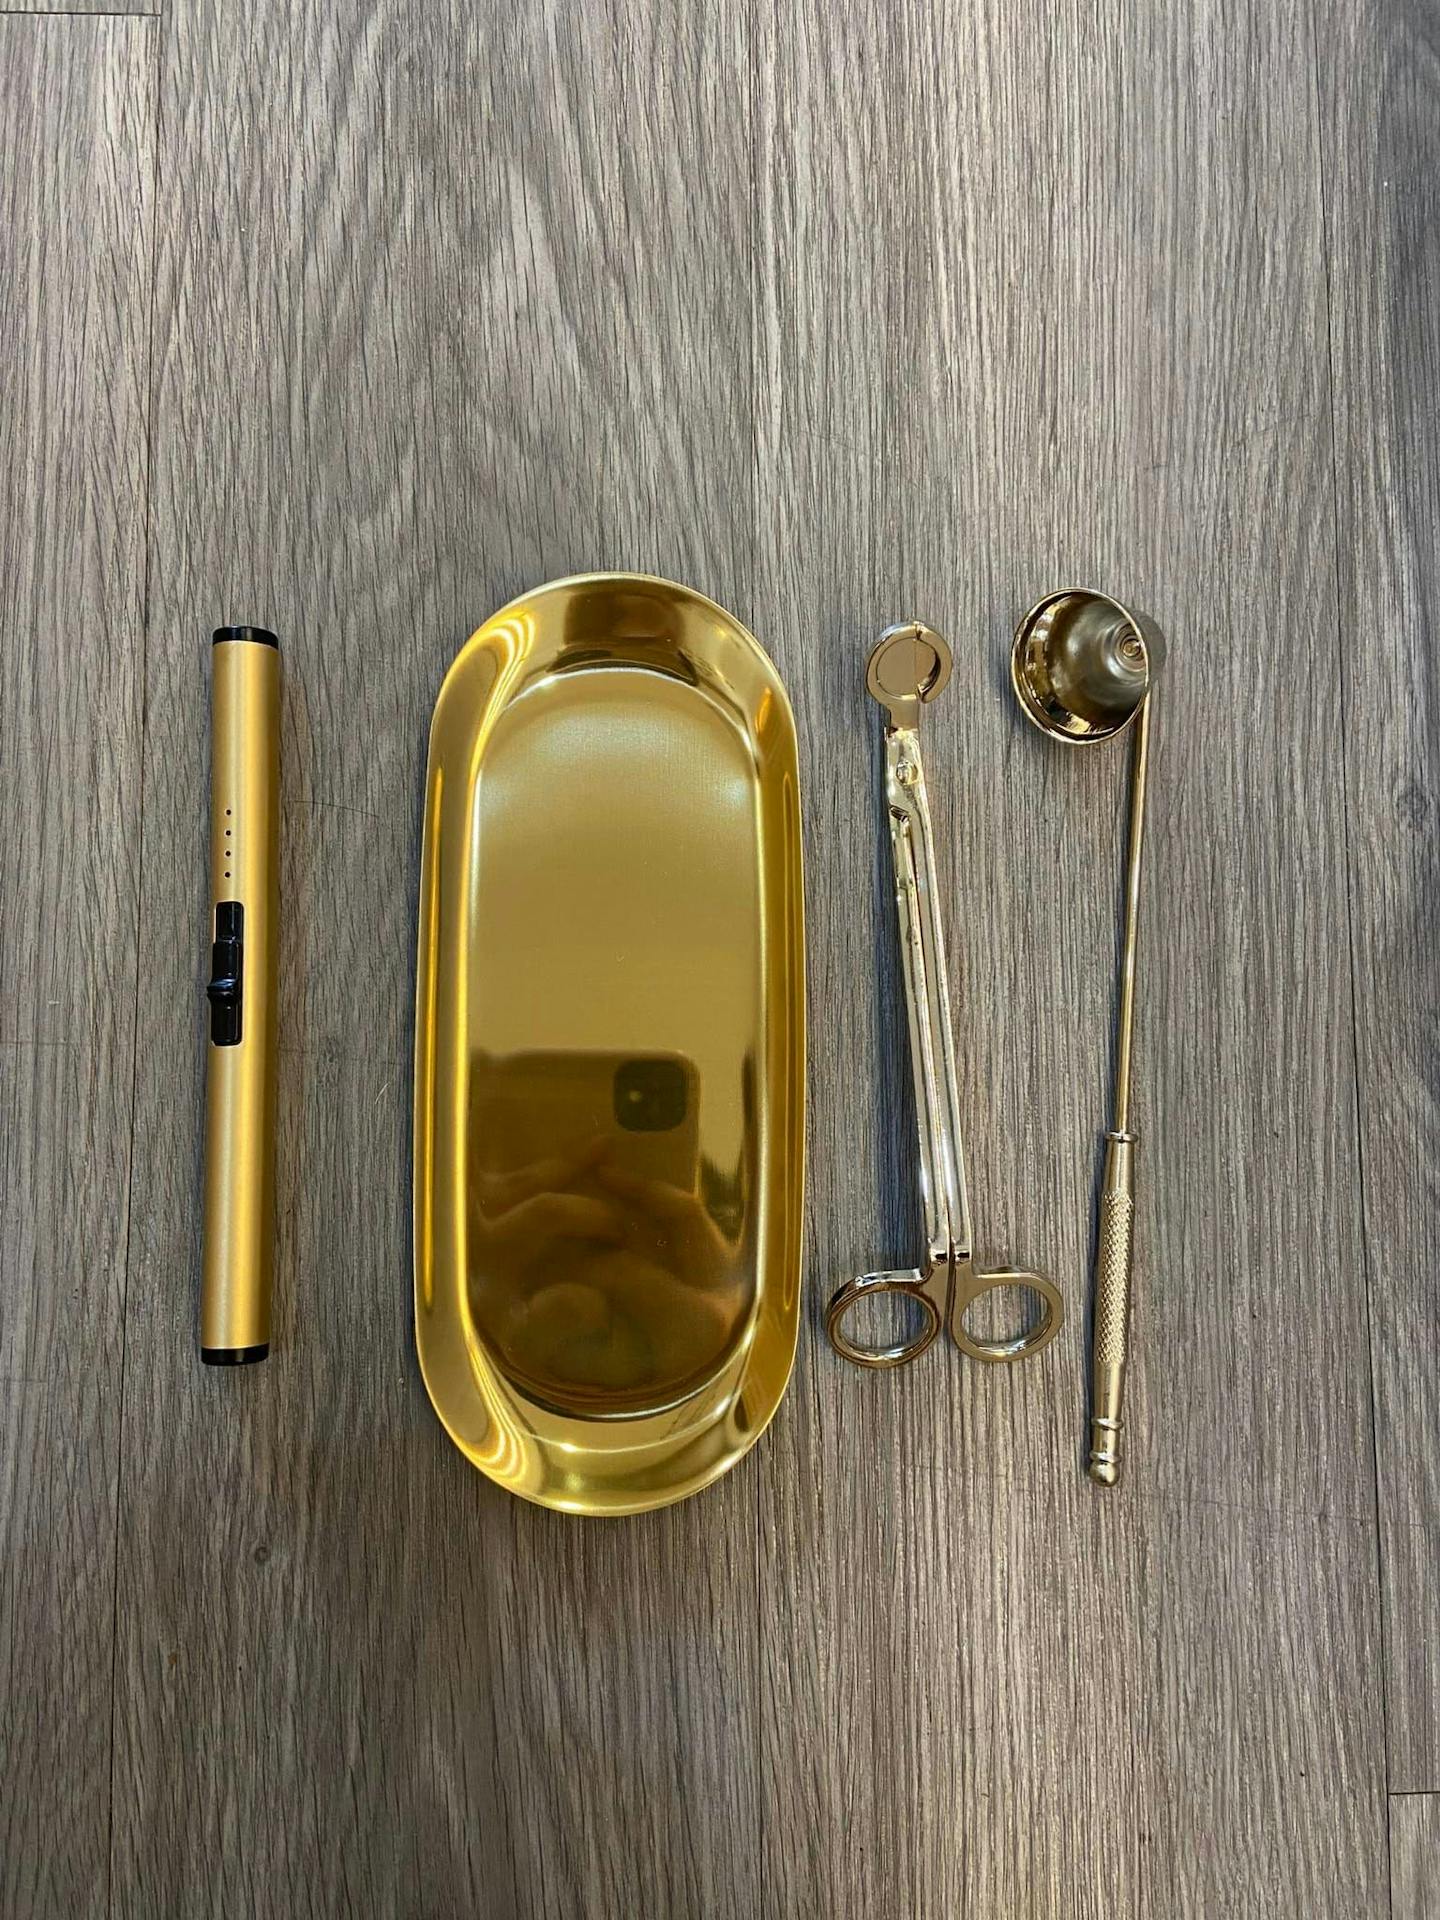 Fragrance Candle Accessories Set - Gold